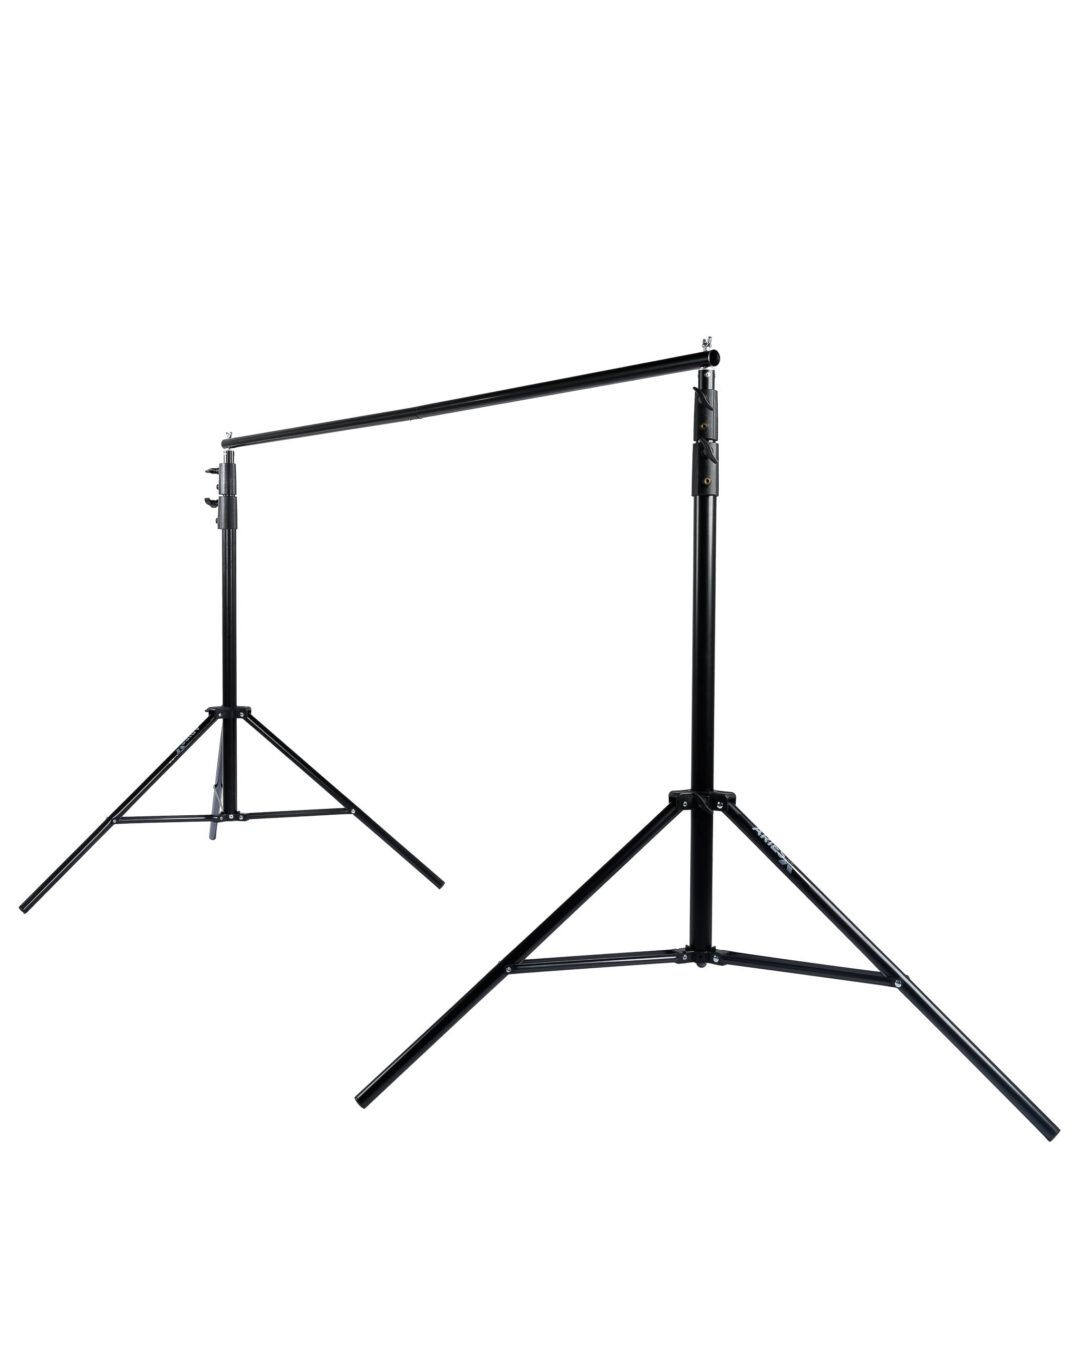 AX-WU-BSM-1009 AriesX StarX Backdrop Stand for Photography (1)